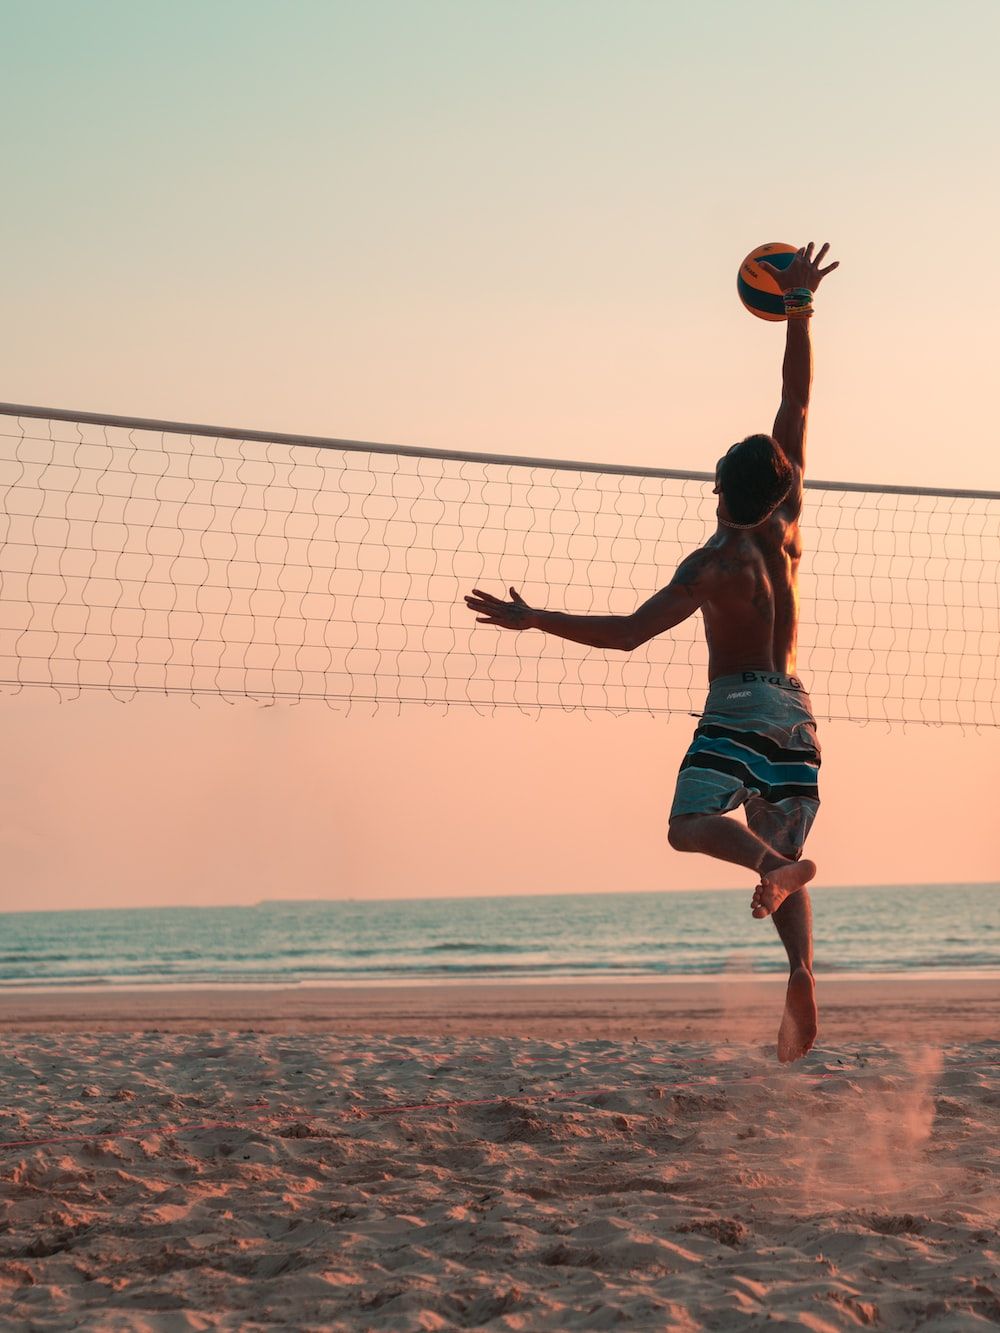 man playing beach volleyball during daytime photo